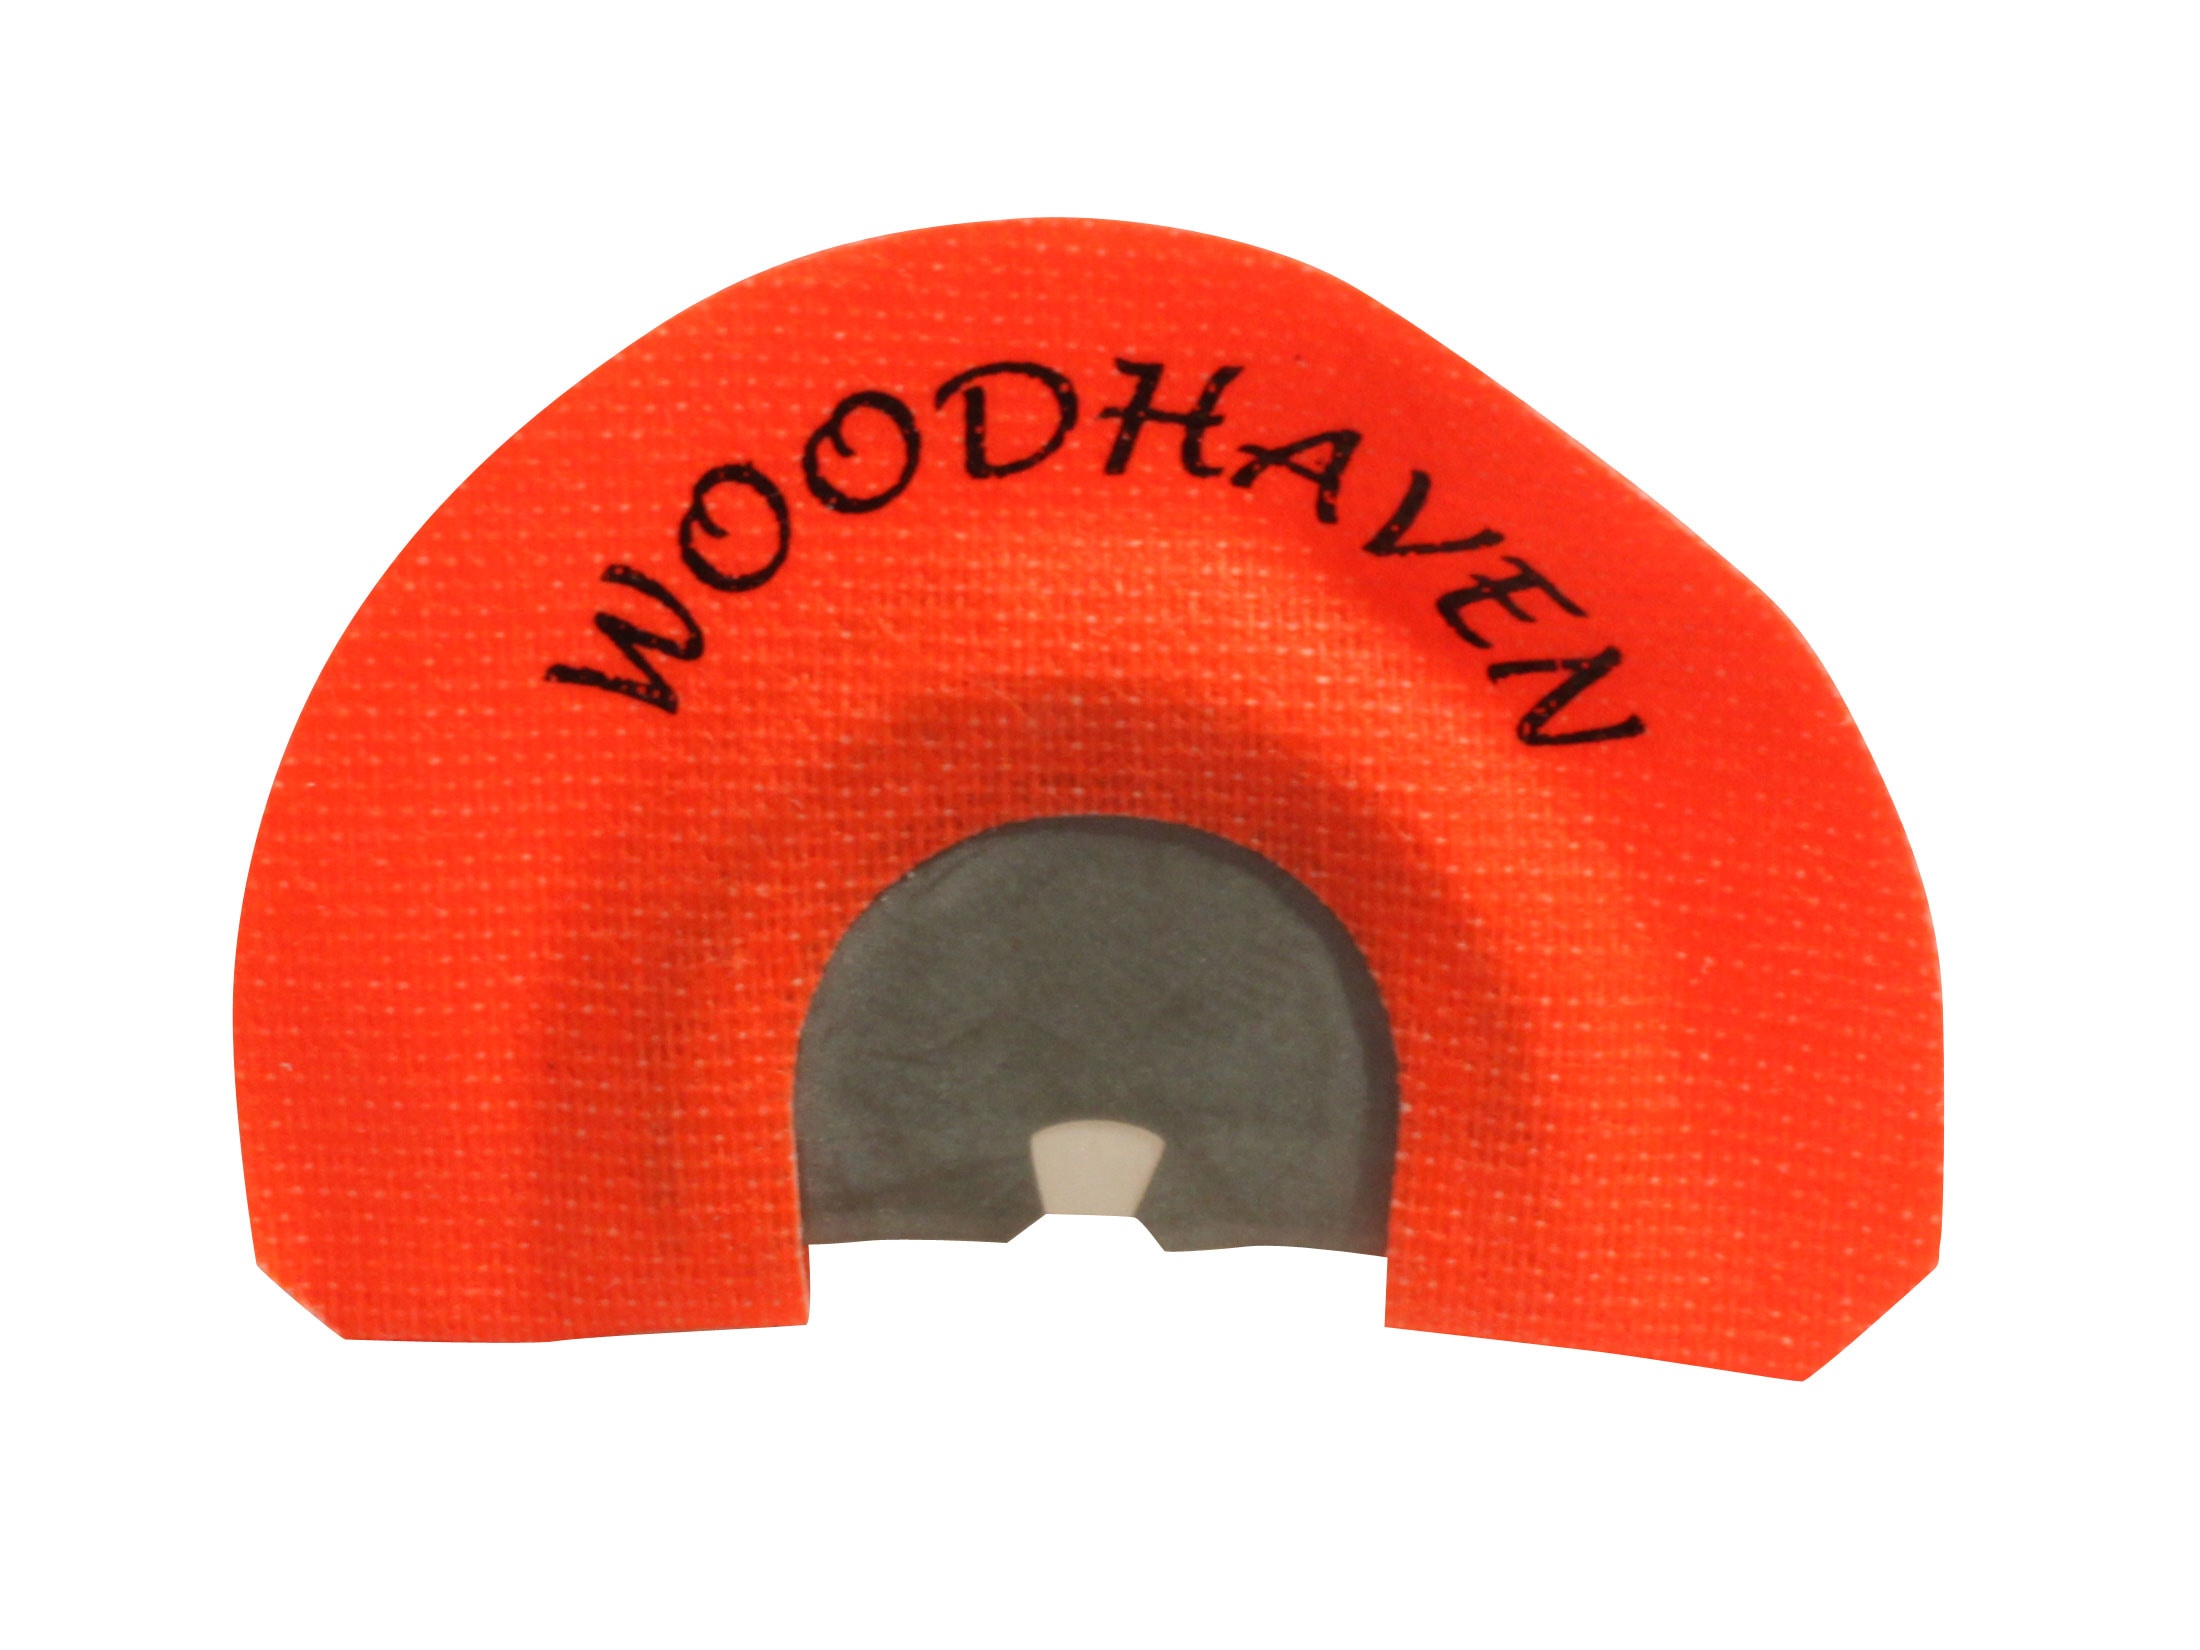 for sale online Woodhaven Custom Calls Toxic Orange 2.5 Reed Mouth Call Wh197 